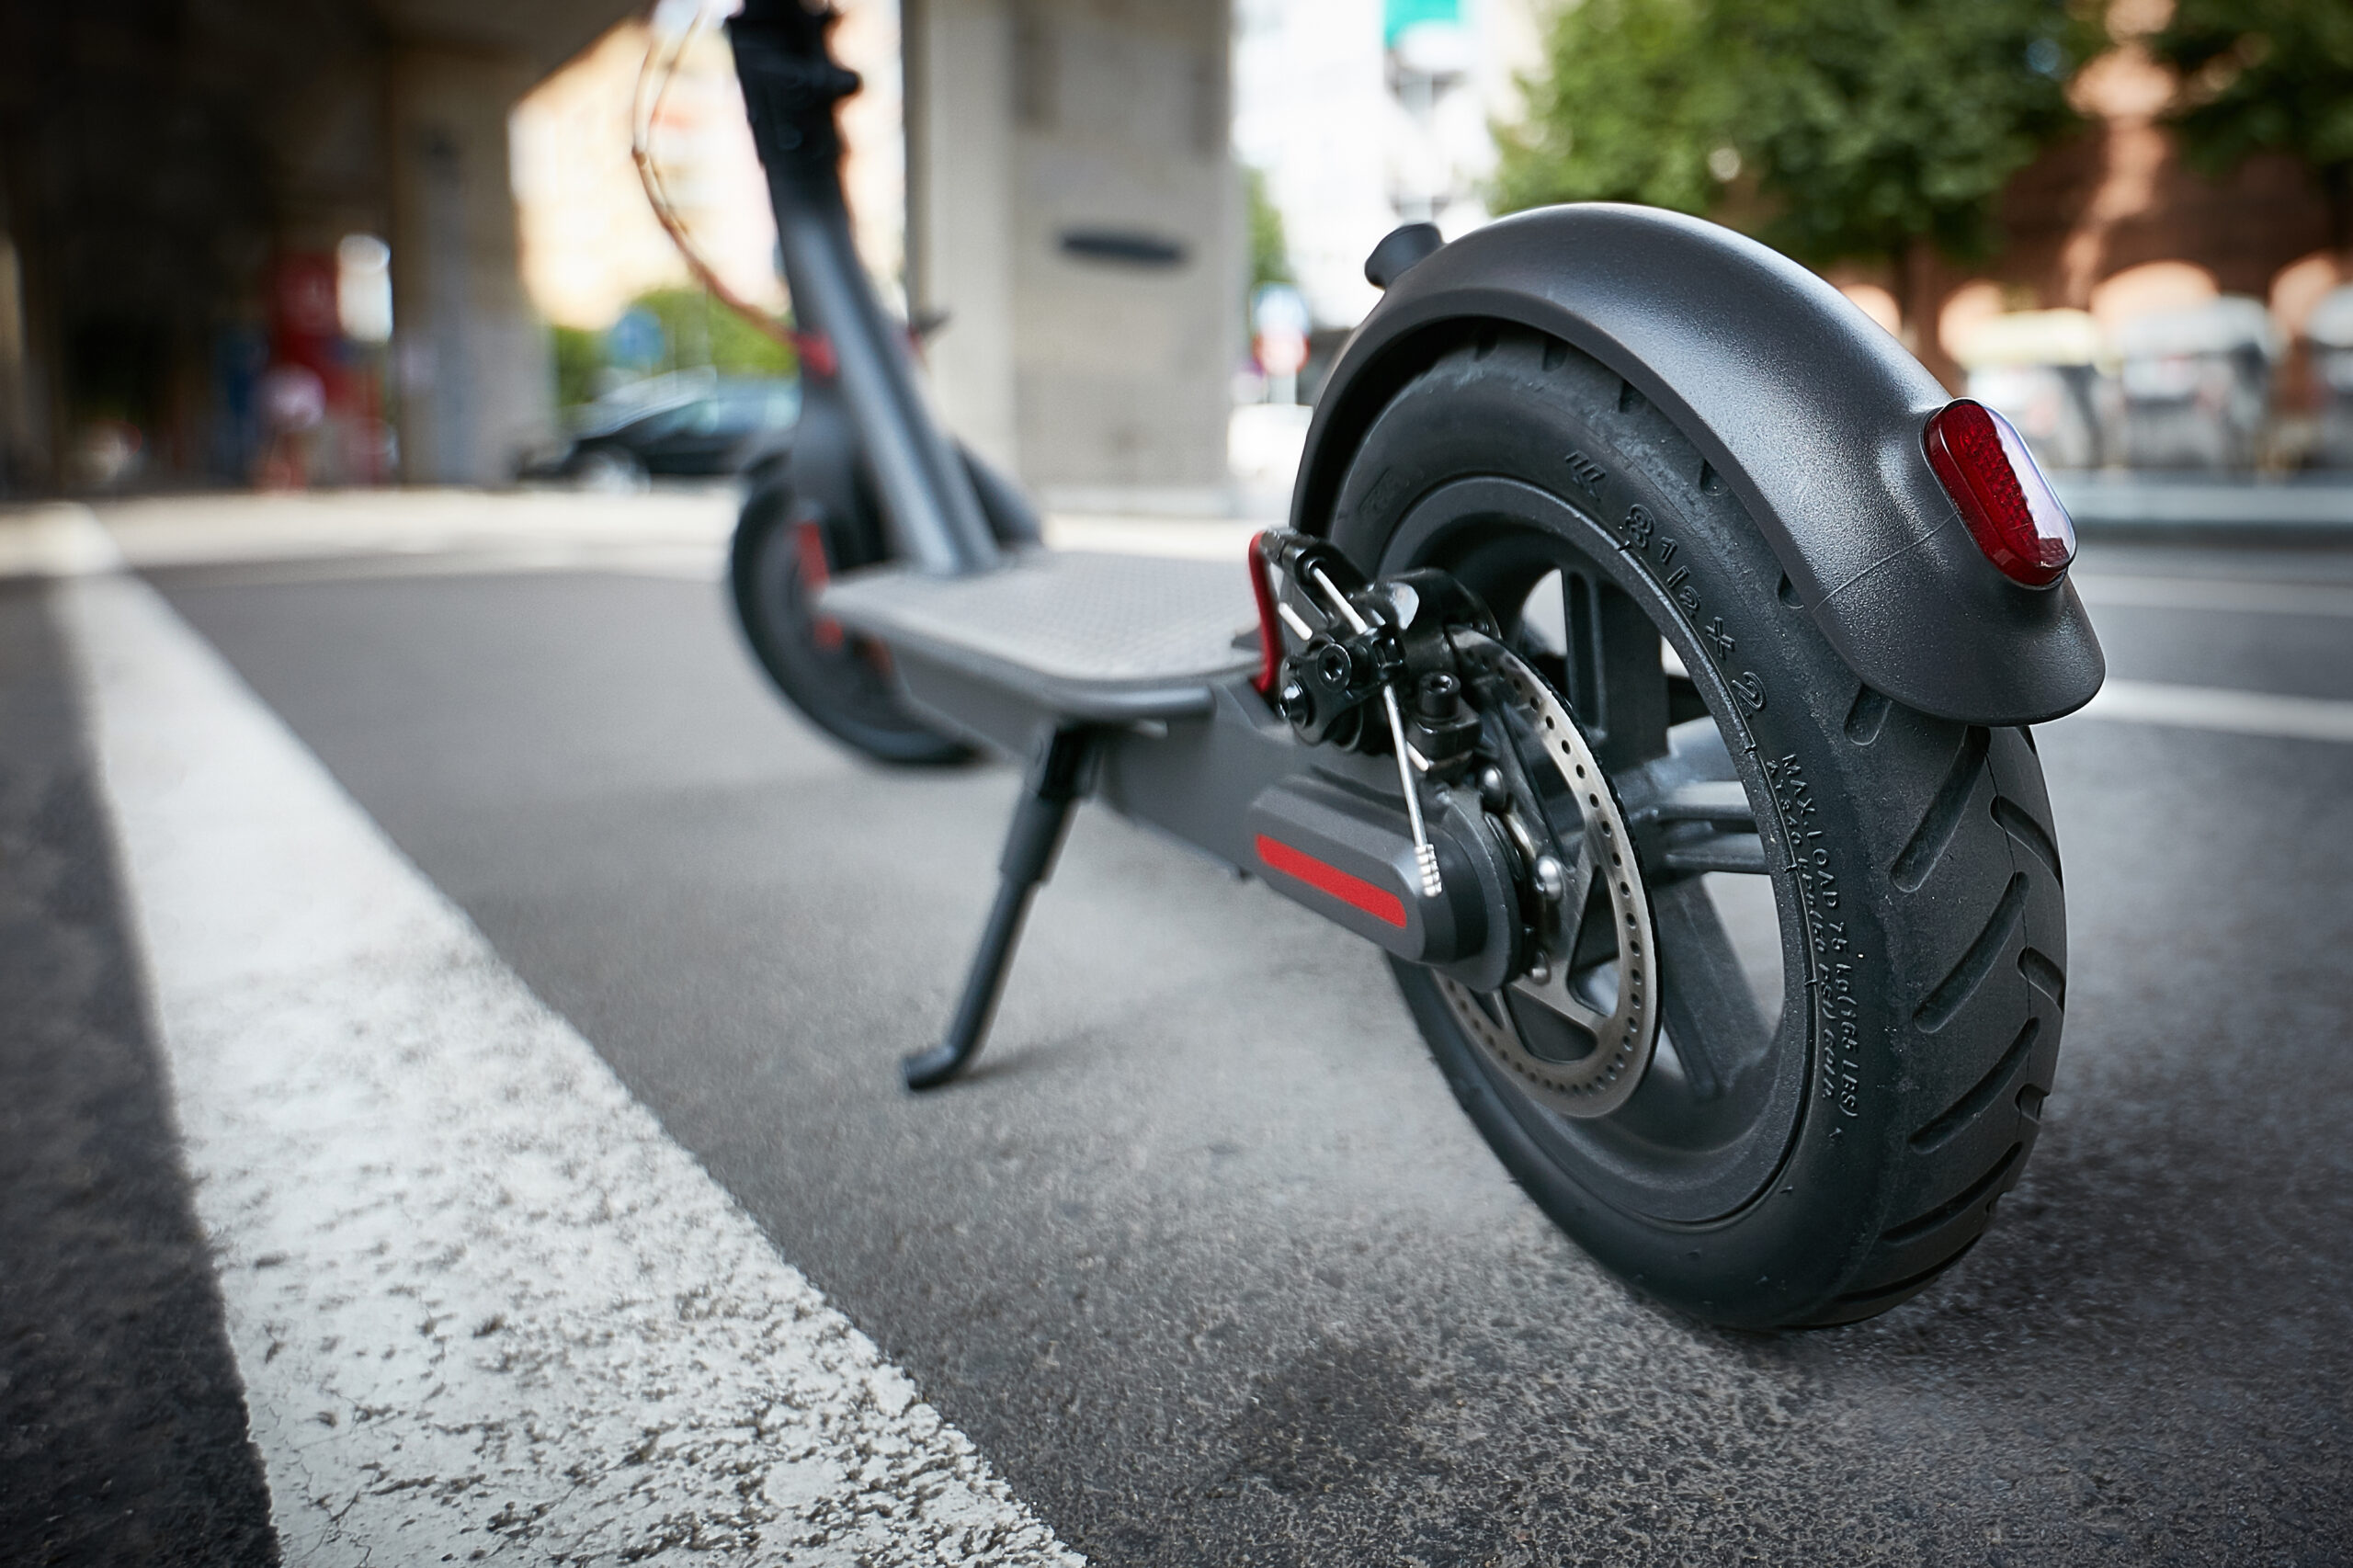 Are Scooters Safer Than Motorcycles?